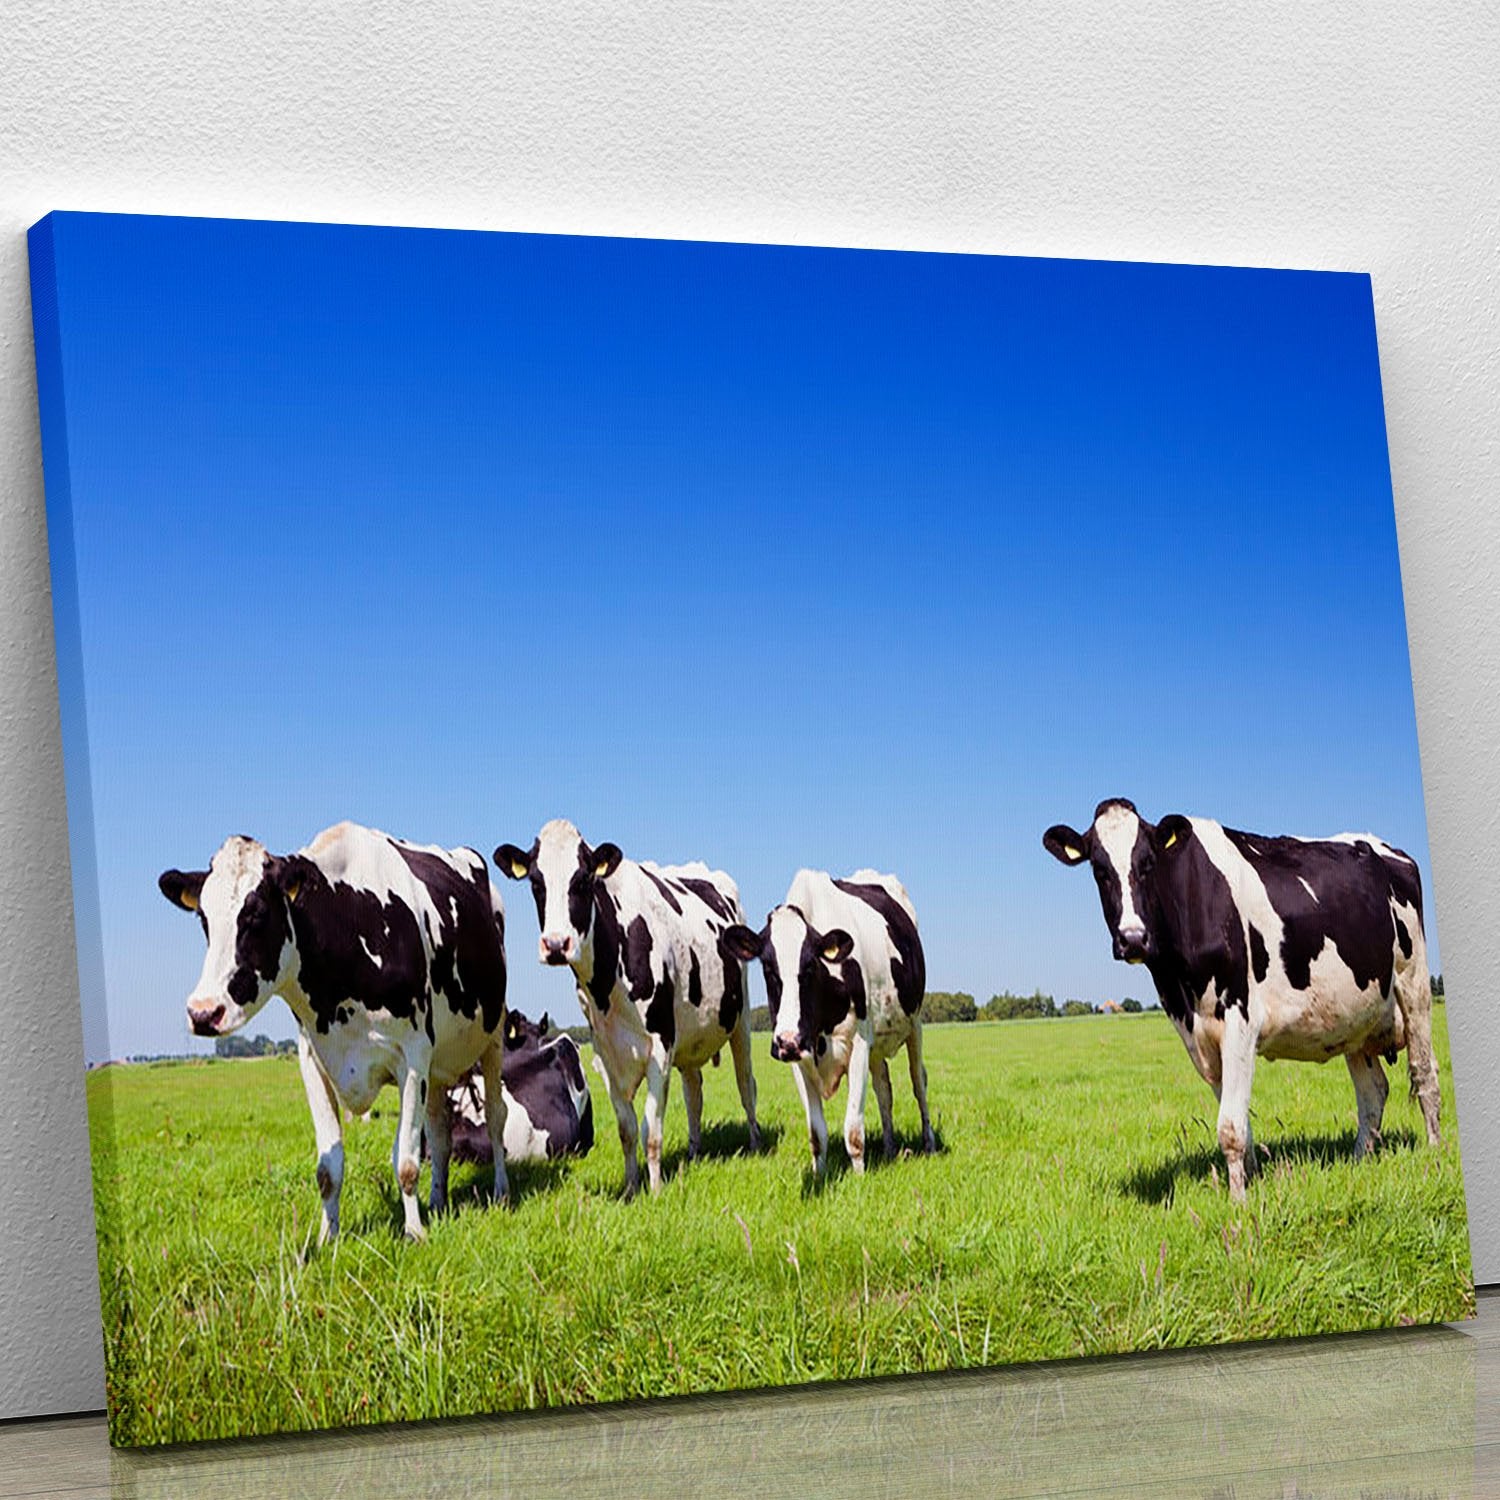 Black and white cows in a grassy field Canvas Print or Poster